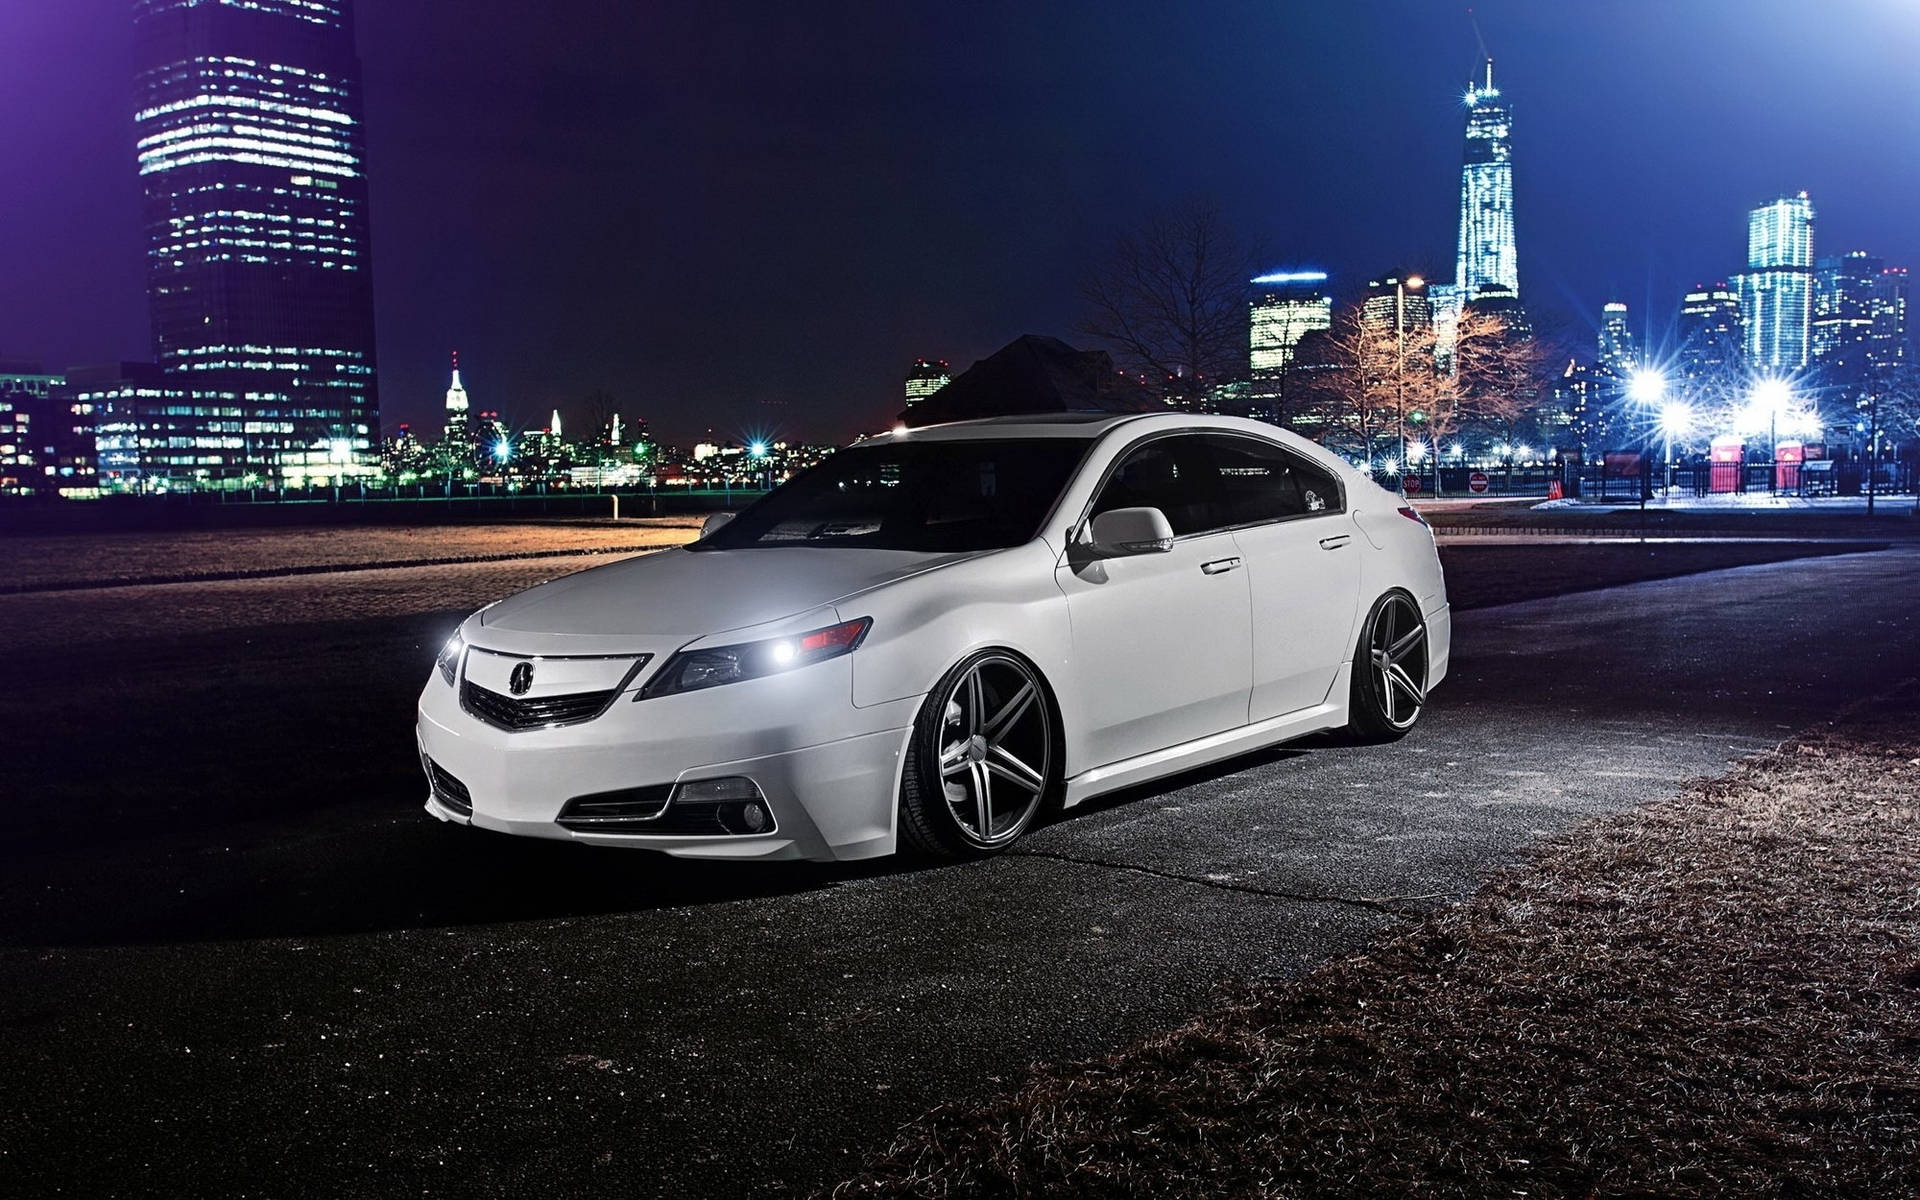 “Experience the sleek and modern style of the Acura TLX.” Wallpaper